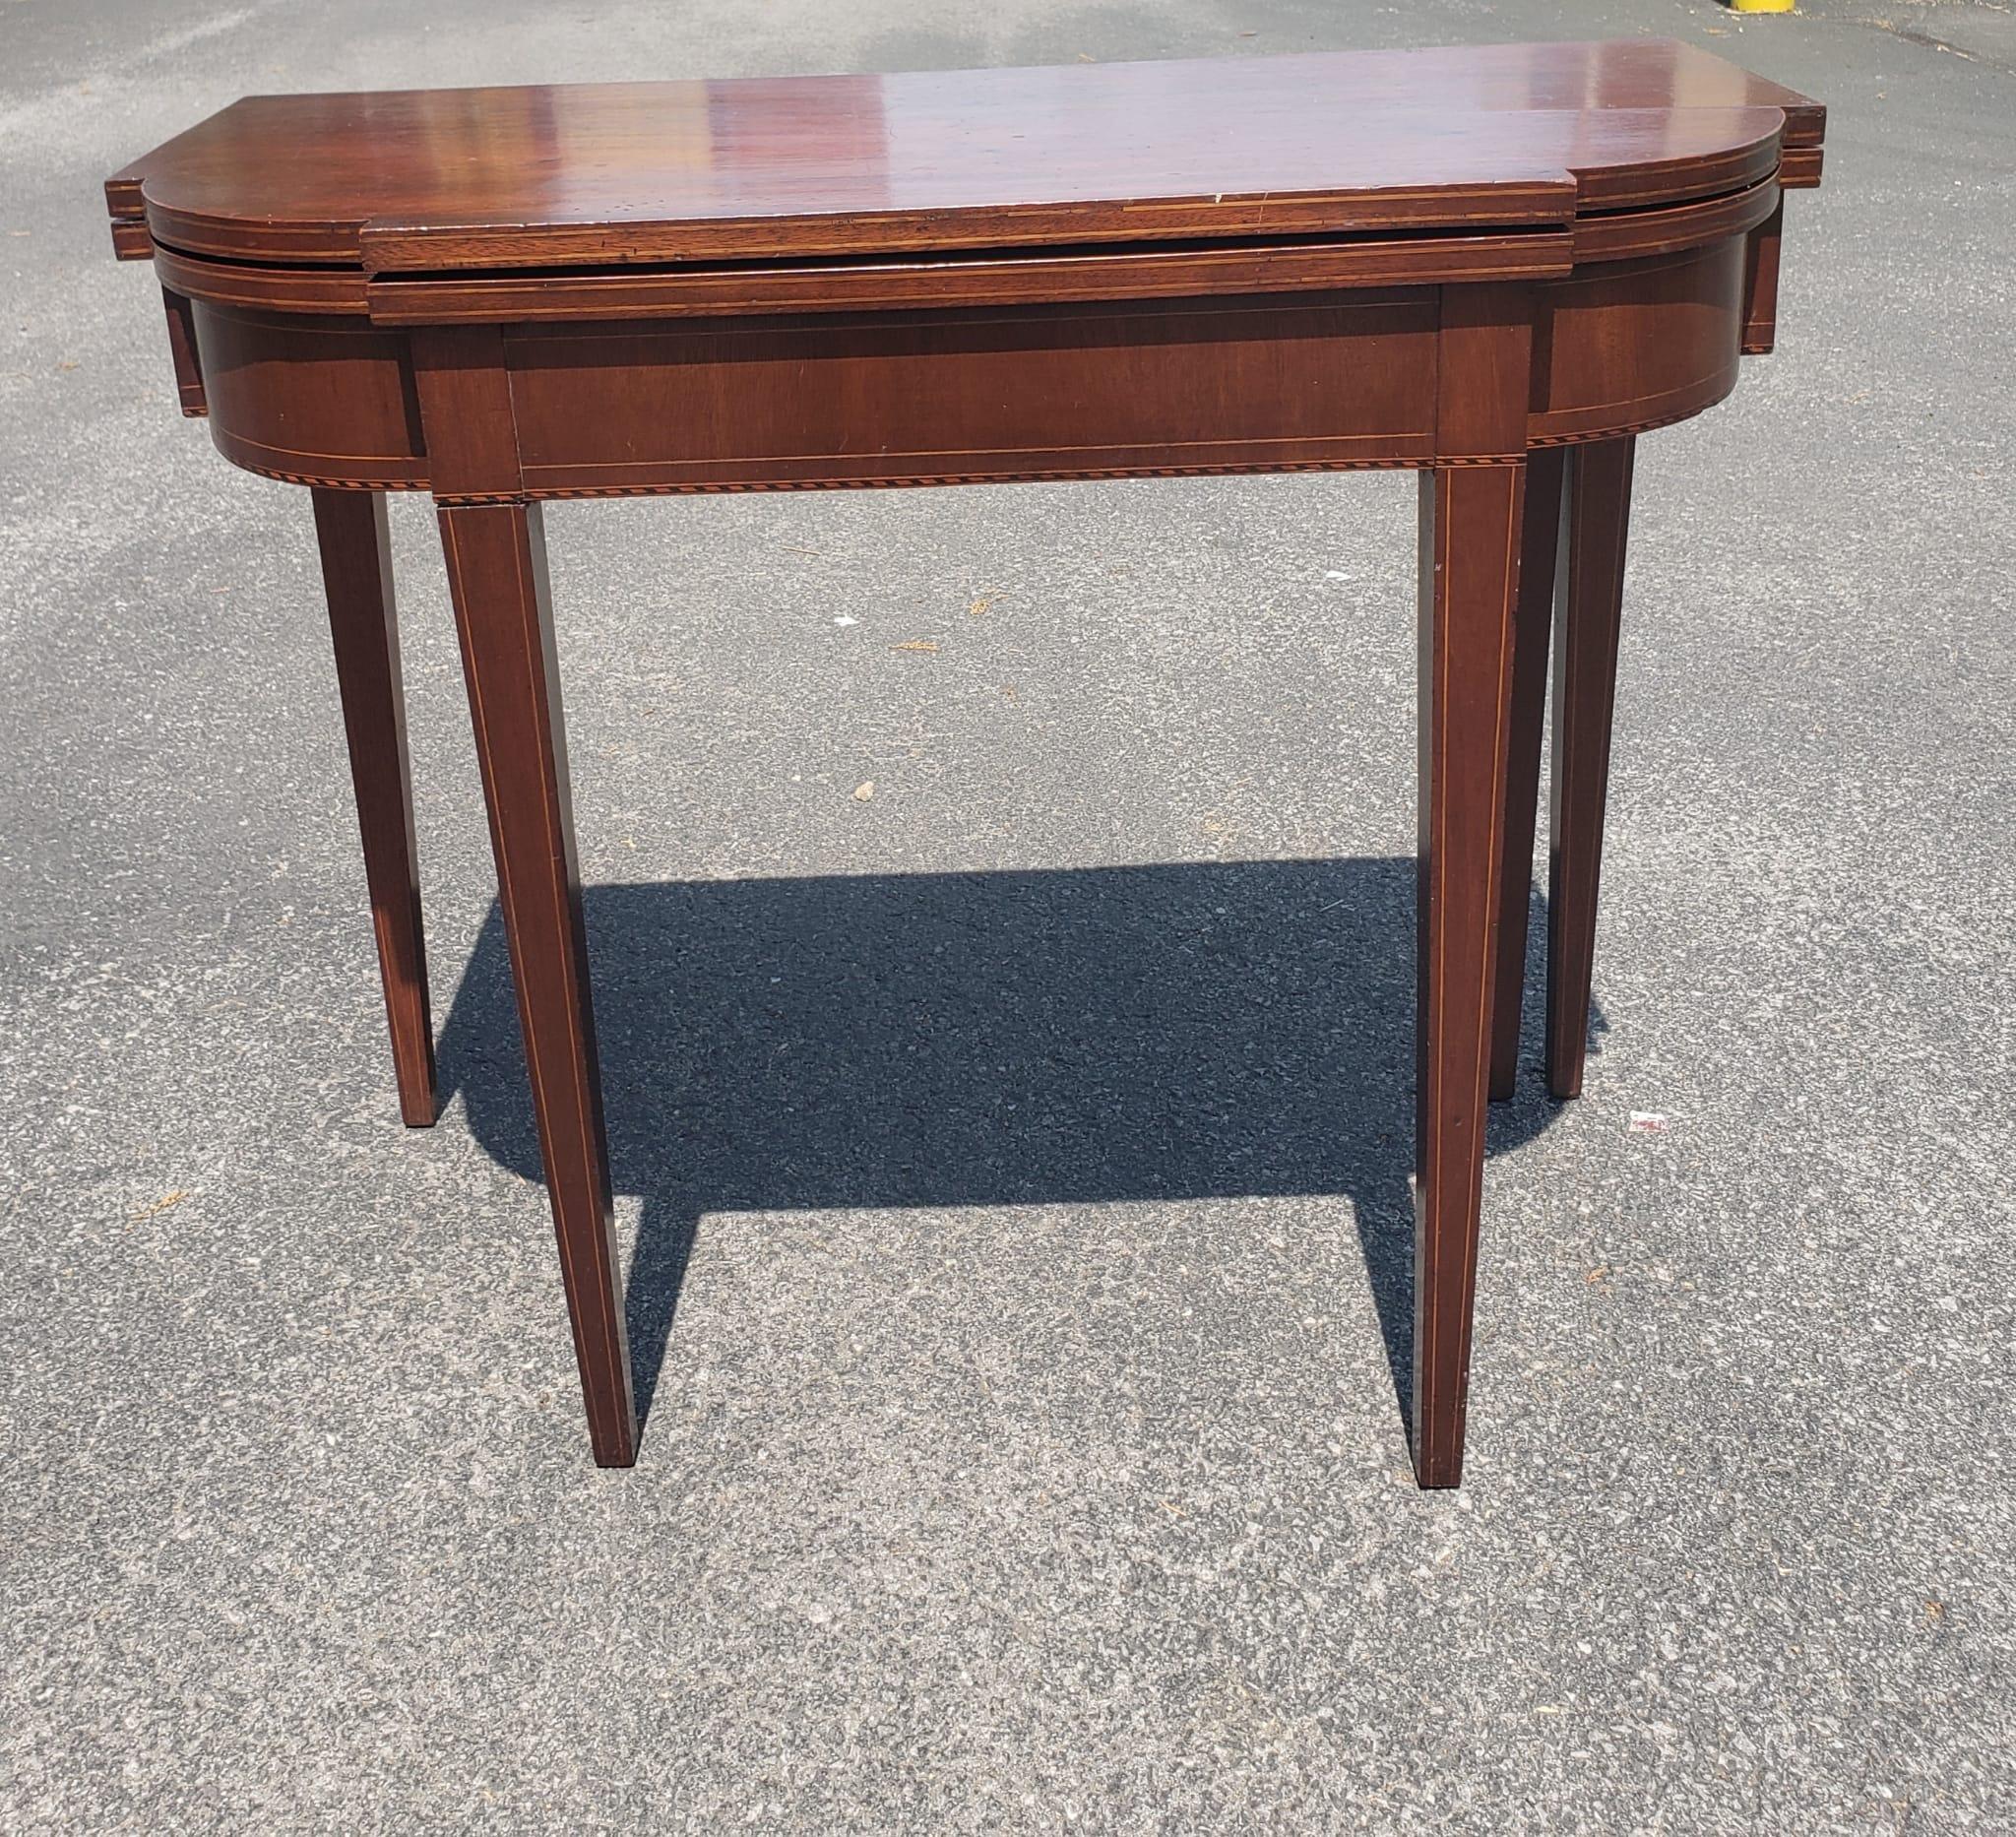 An early 20th Century fold-top mahogany console table with satinwood inlays.
Measures 36